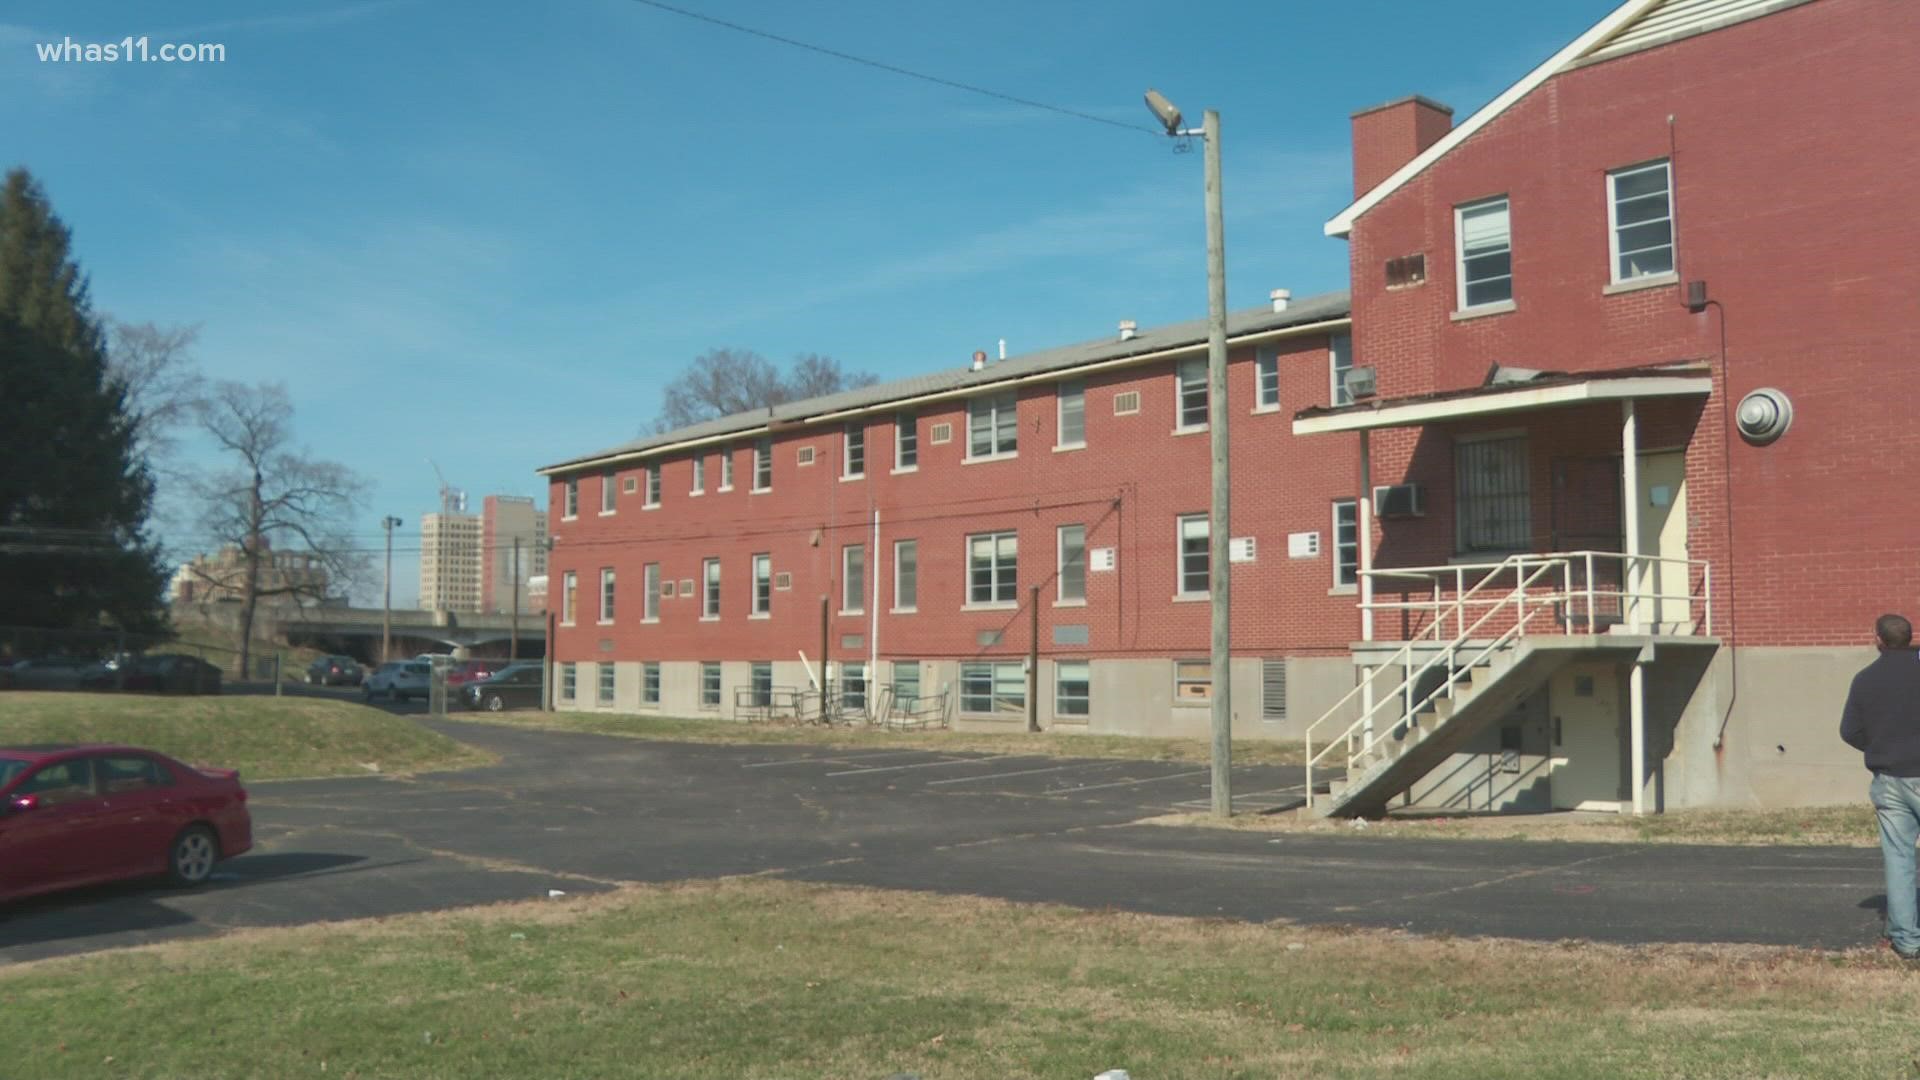 Organizers of the Hope Village on East College Street answered questions about the space that will help those affected by homelessness.